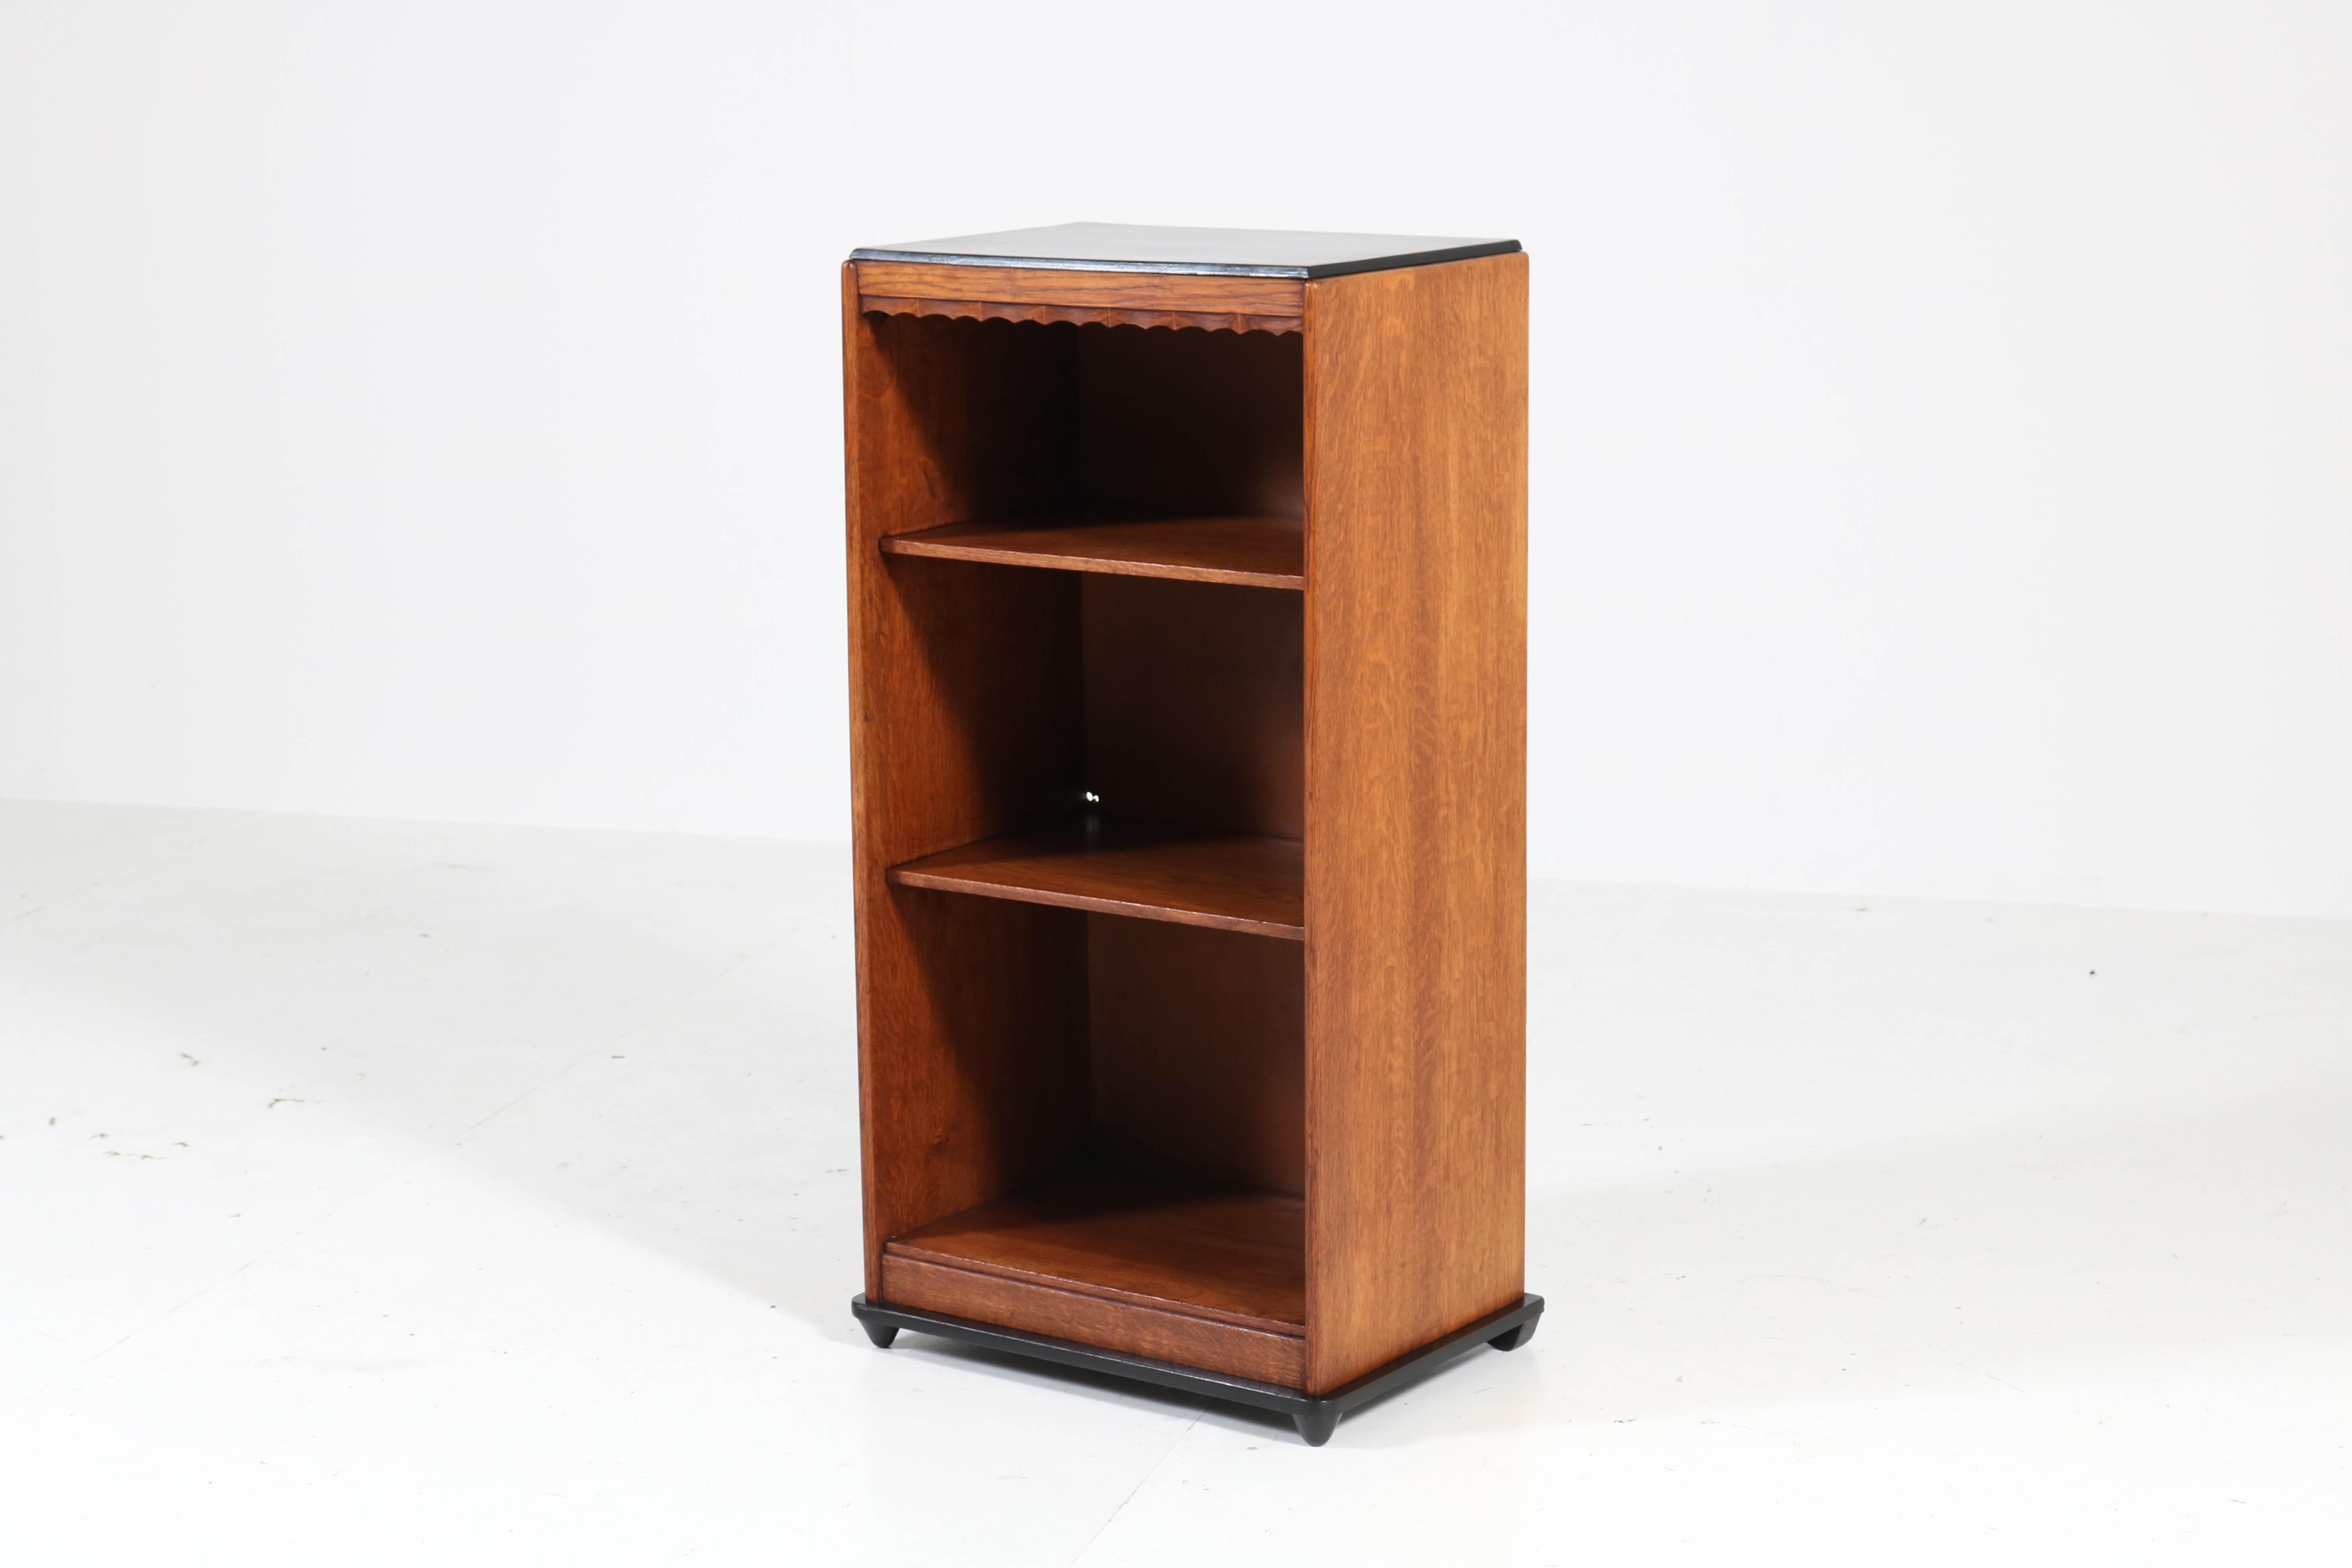 Elegant and rare Art Deco Amsterdam School open bookcase.
Design by Willem Penaat for Metz & Co., Amsterdam.
Striking Dutch design from the 1920s.
Solid oak with original black lacquered top.
In very good condition with minor wear consistent